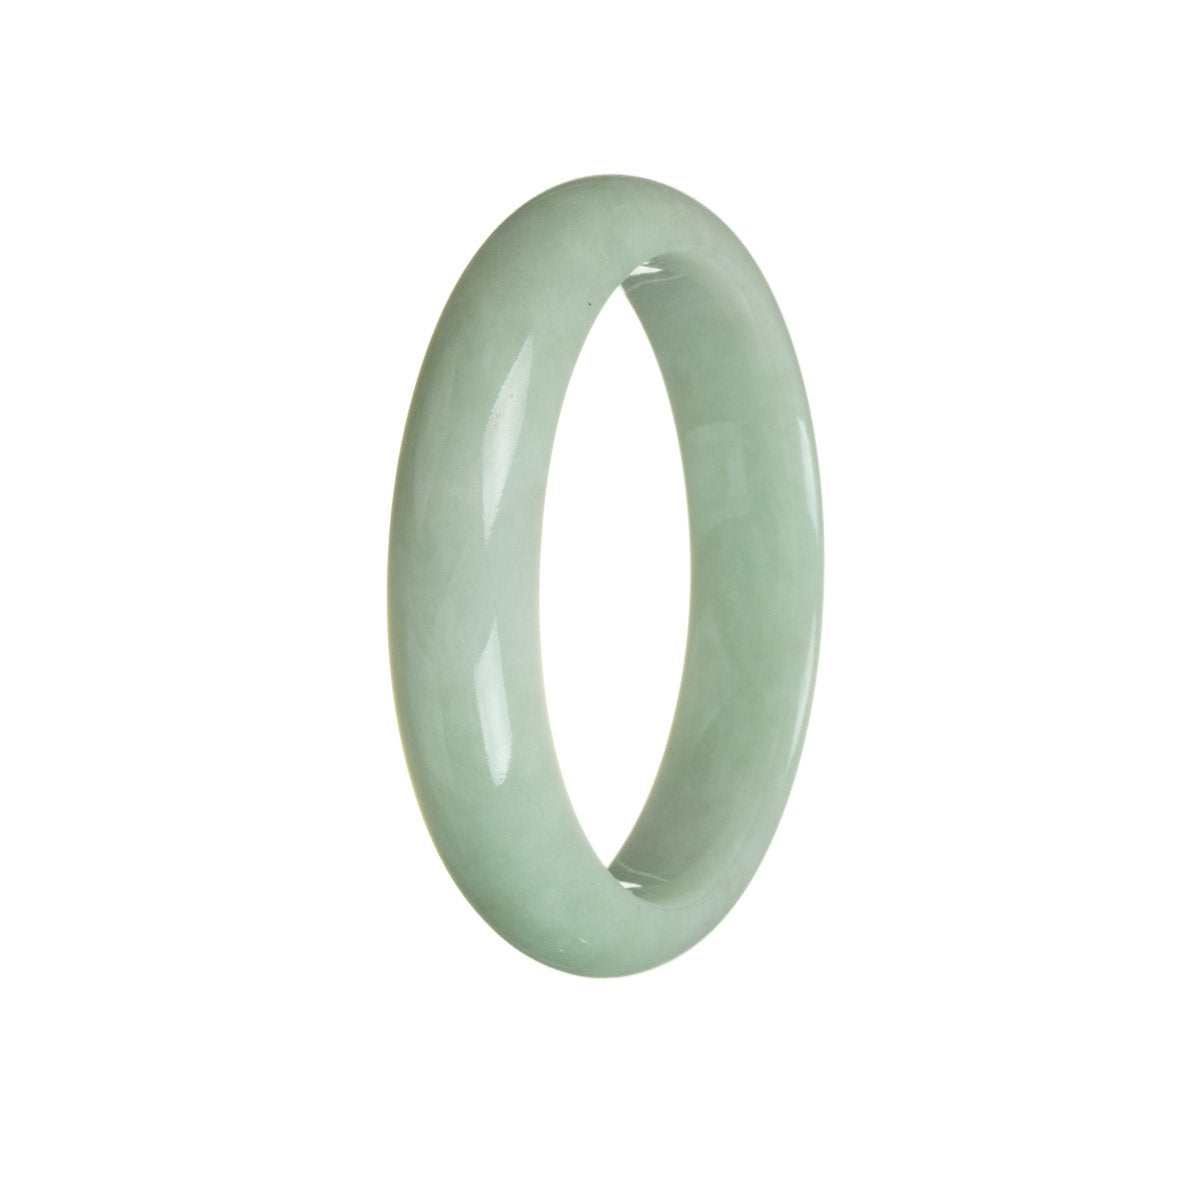 A close-up photo of a high-quality green jadeite bracelet, specifically a 59mm half moon shape. The jadeite is of the genuine Type A variety, known for its vivid green color and smooth texture. The bracelet is from the brand MAYS, showcasing exquisite craftsmanship and elegance.